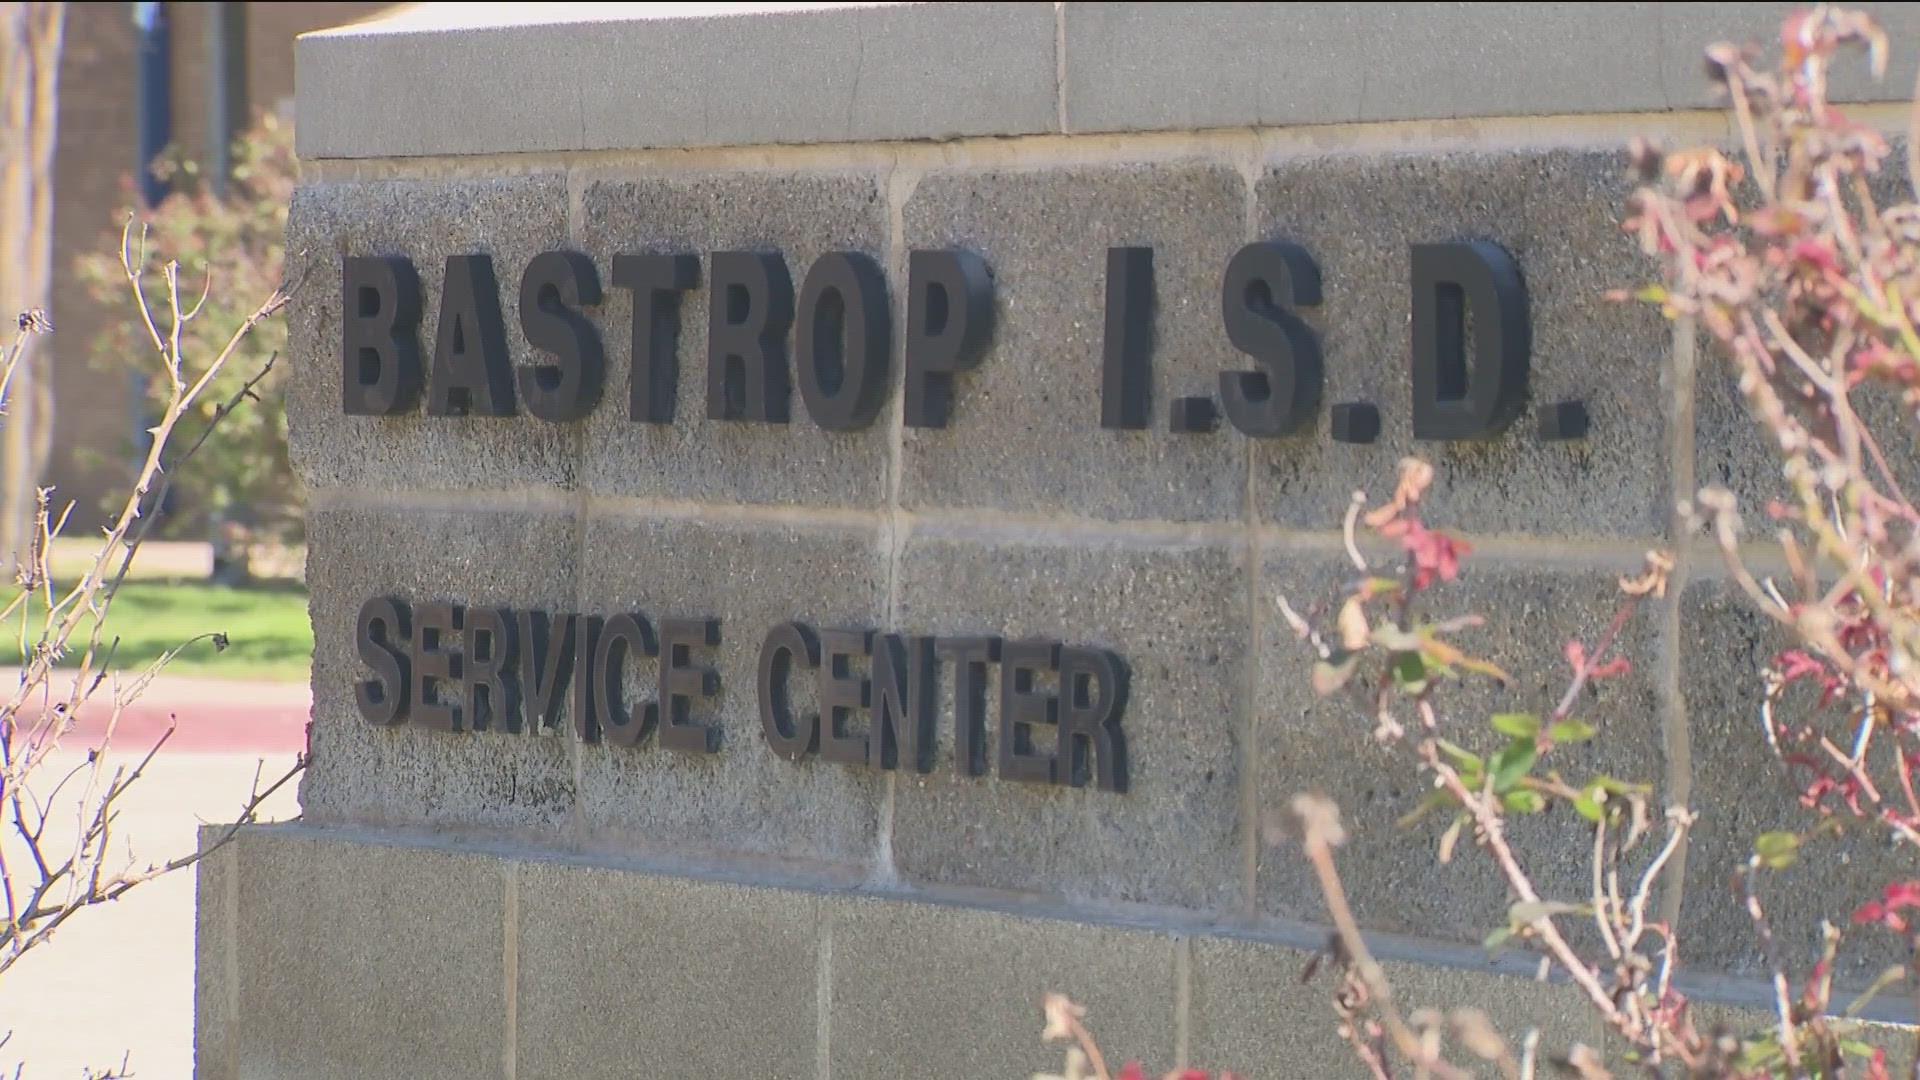 New details have emerged about an unaccredited university that Bastrop ISD collaborated with to get more teachers certified. It has left several teachers concerned.